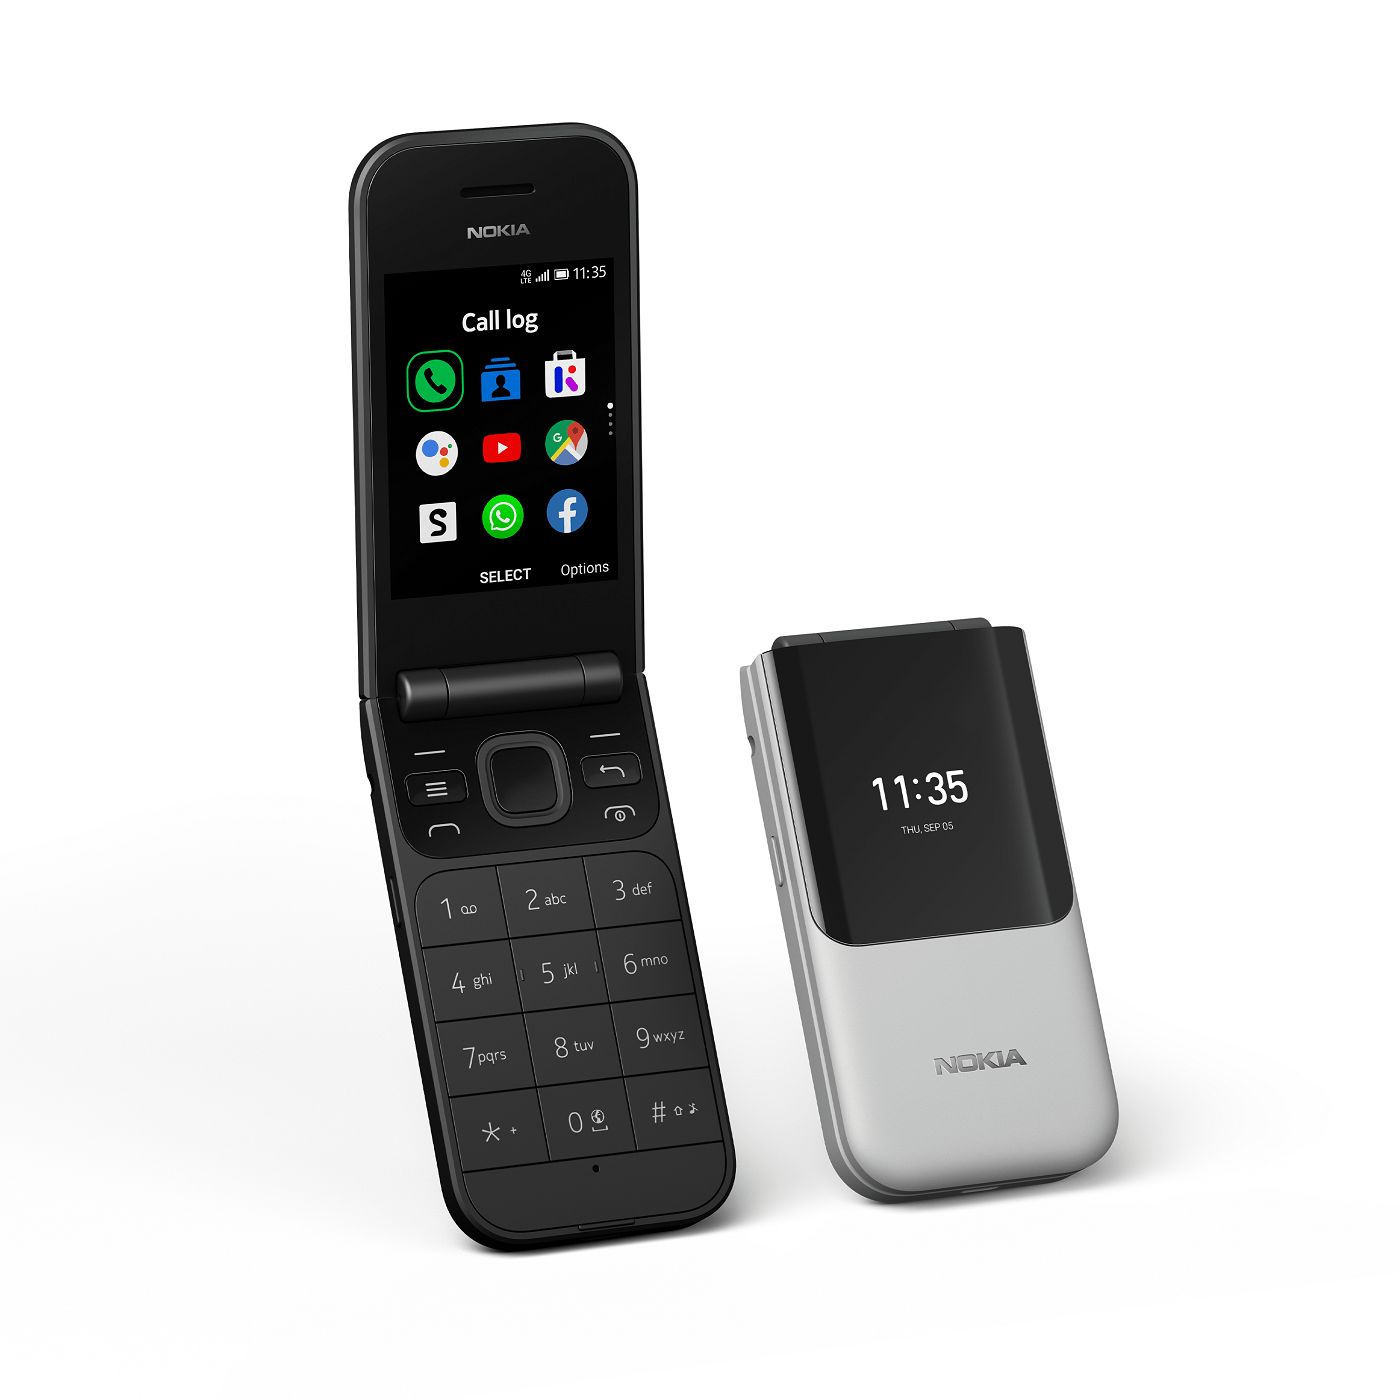 Nokia 2720 Flip Available On Amazon India Before Official Launch